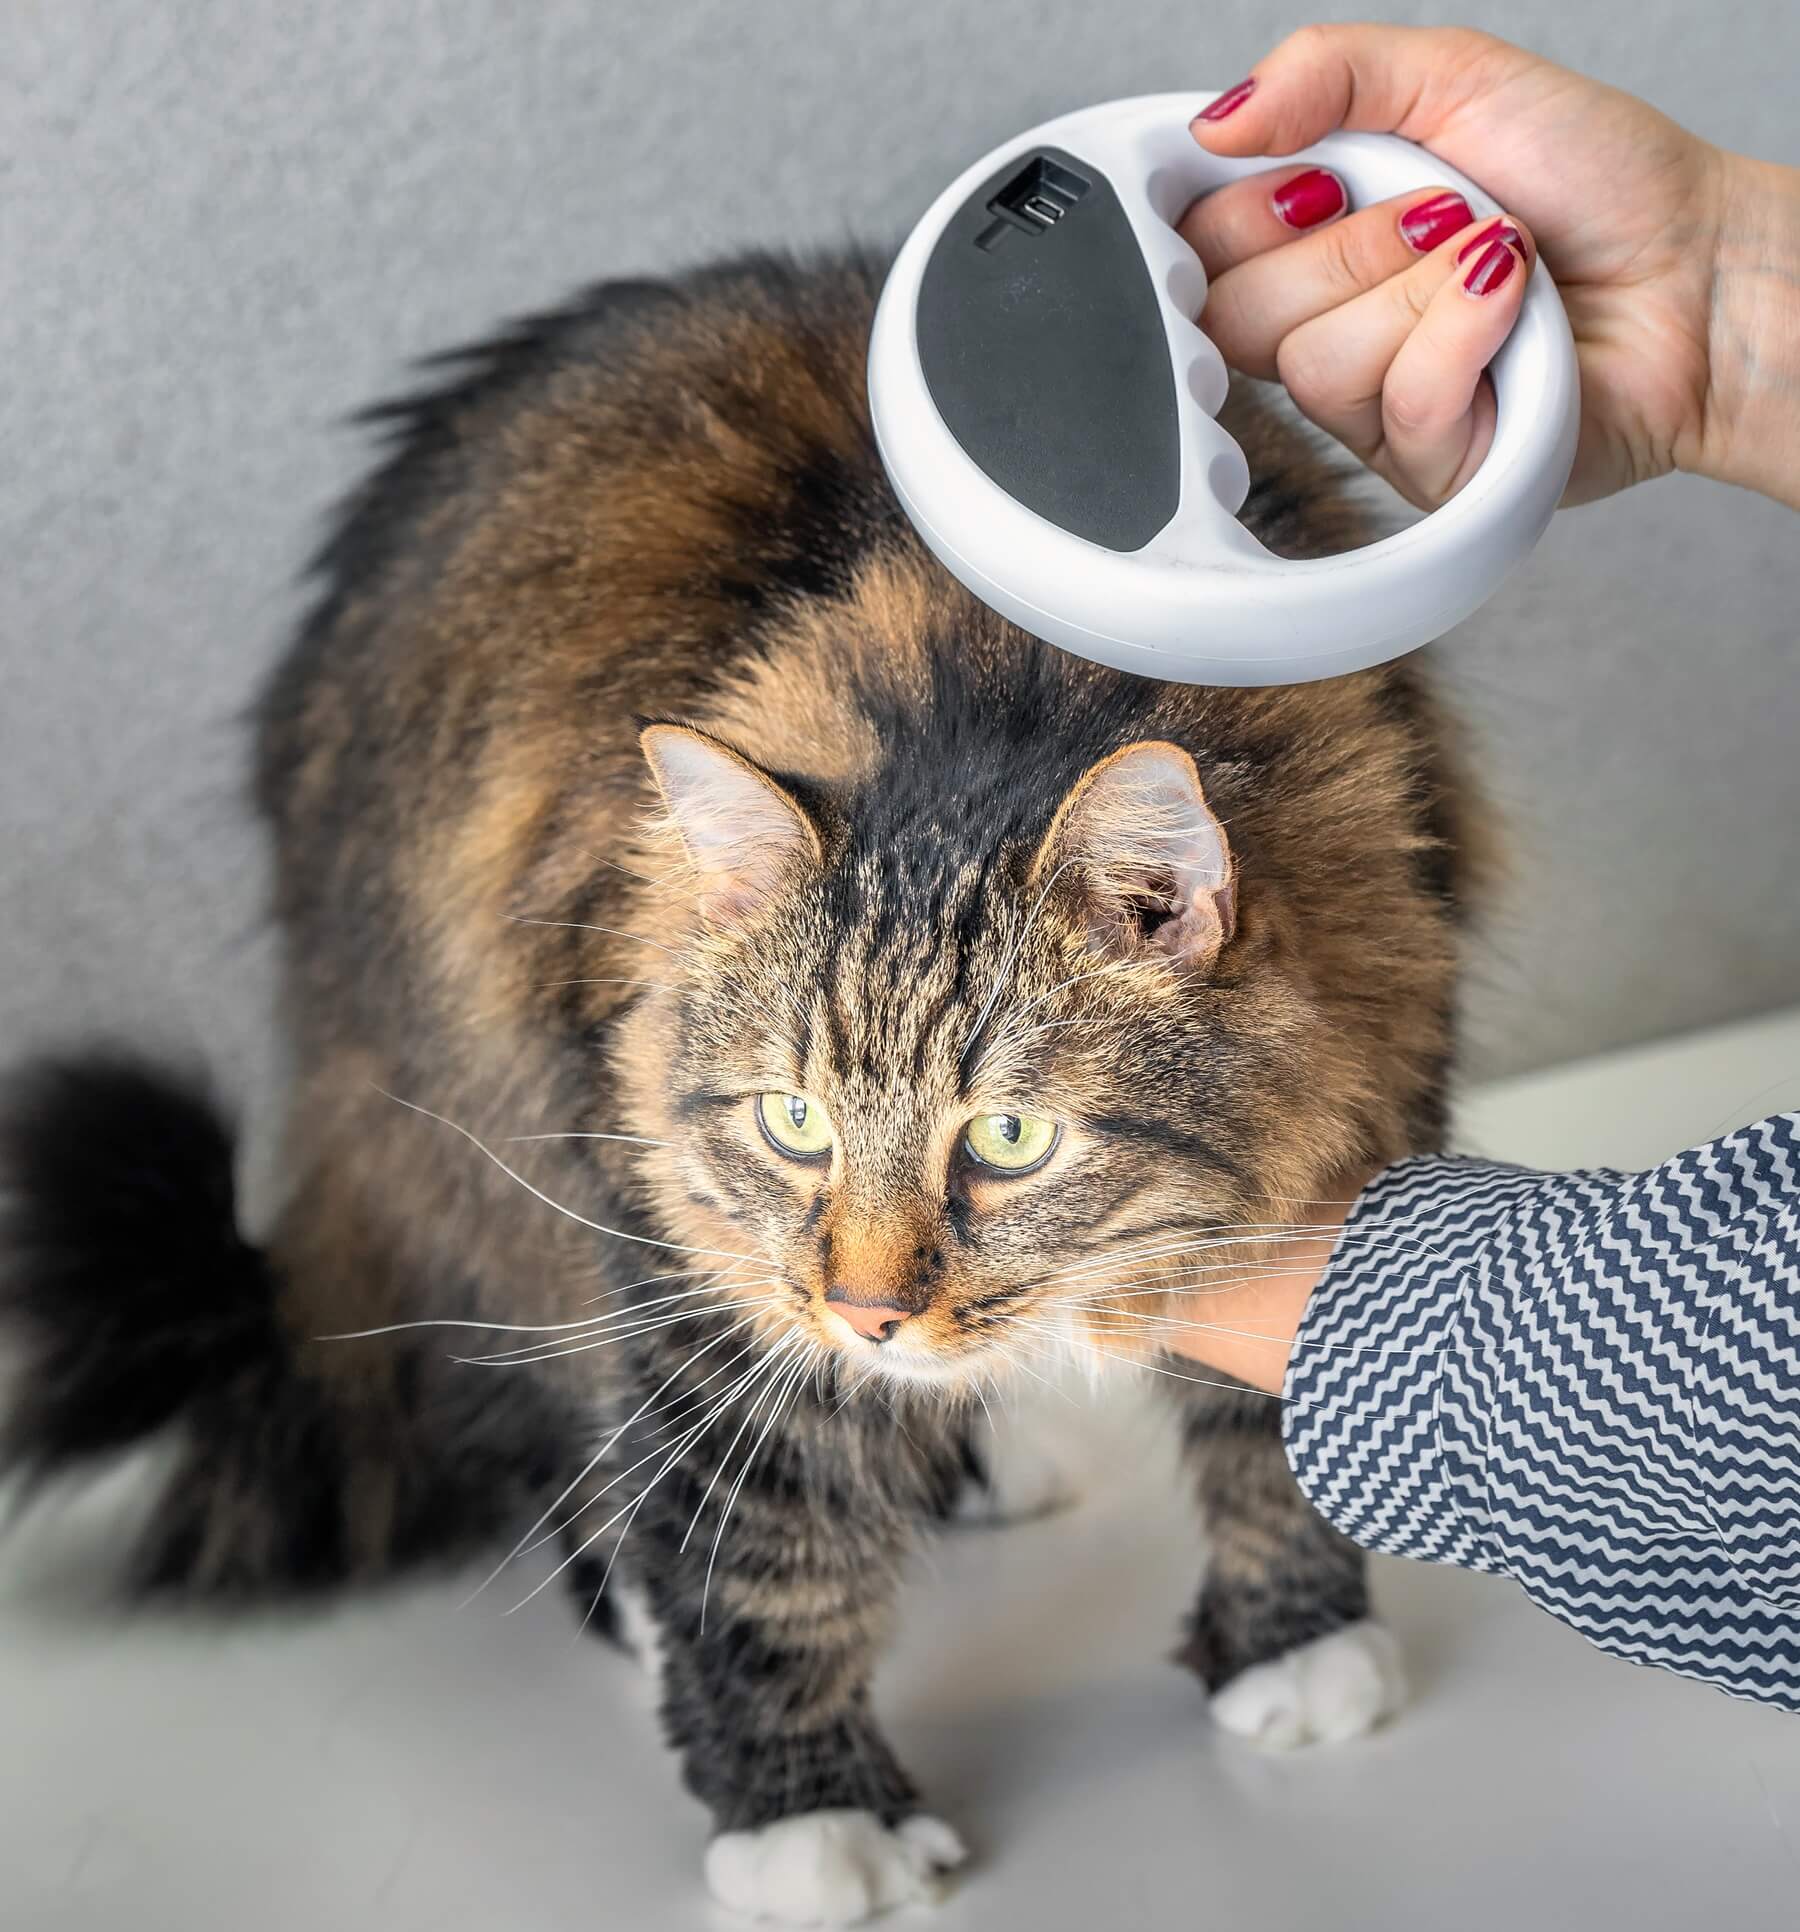 cat with microchip scanner